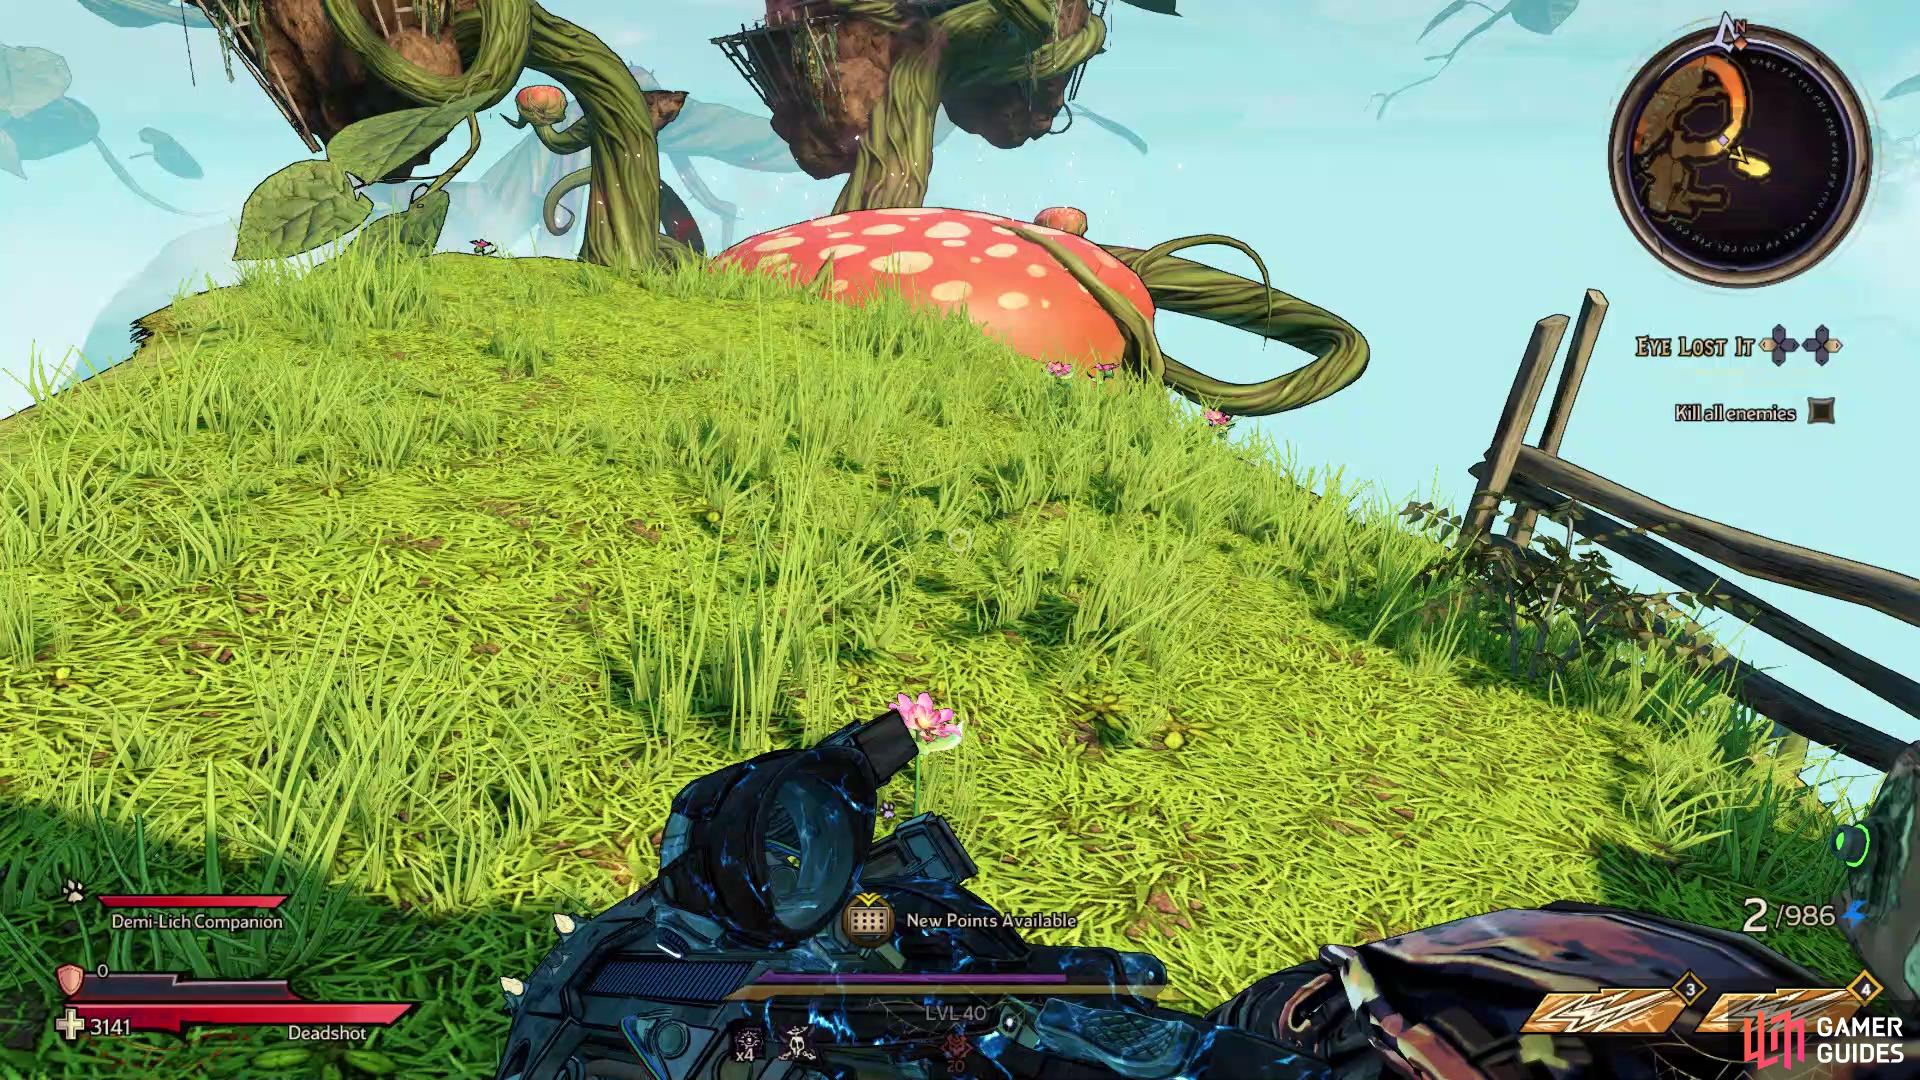 Use the mushroom pictured to bounce over to the area you need